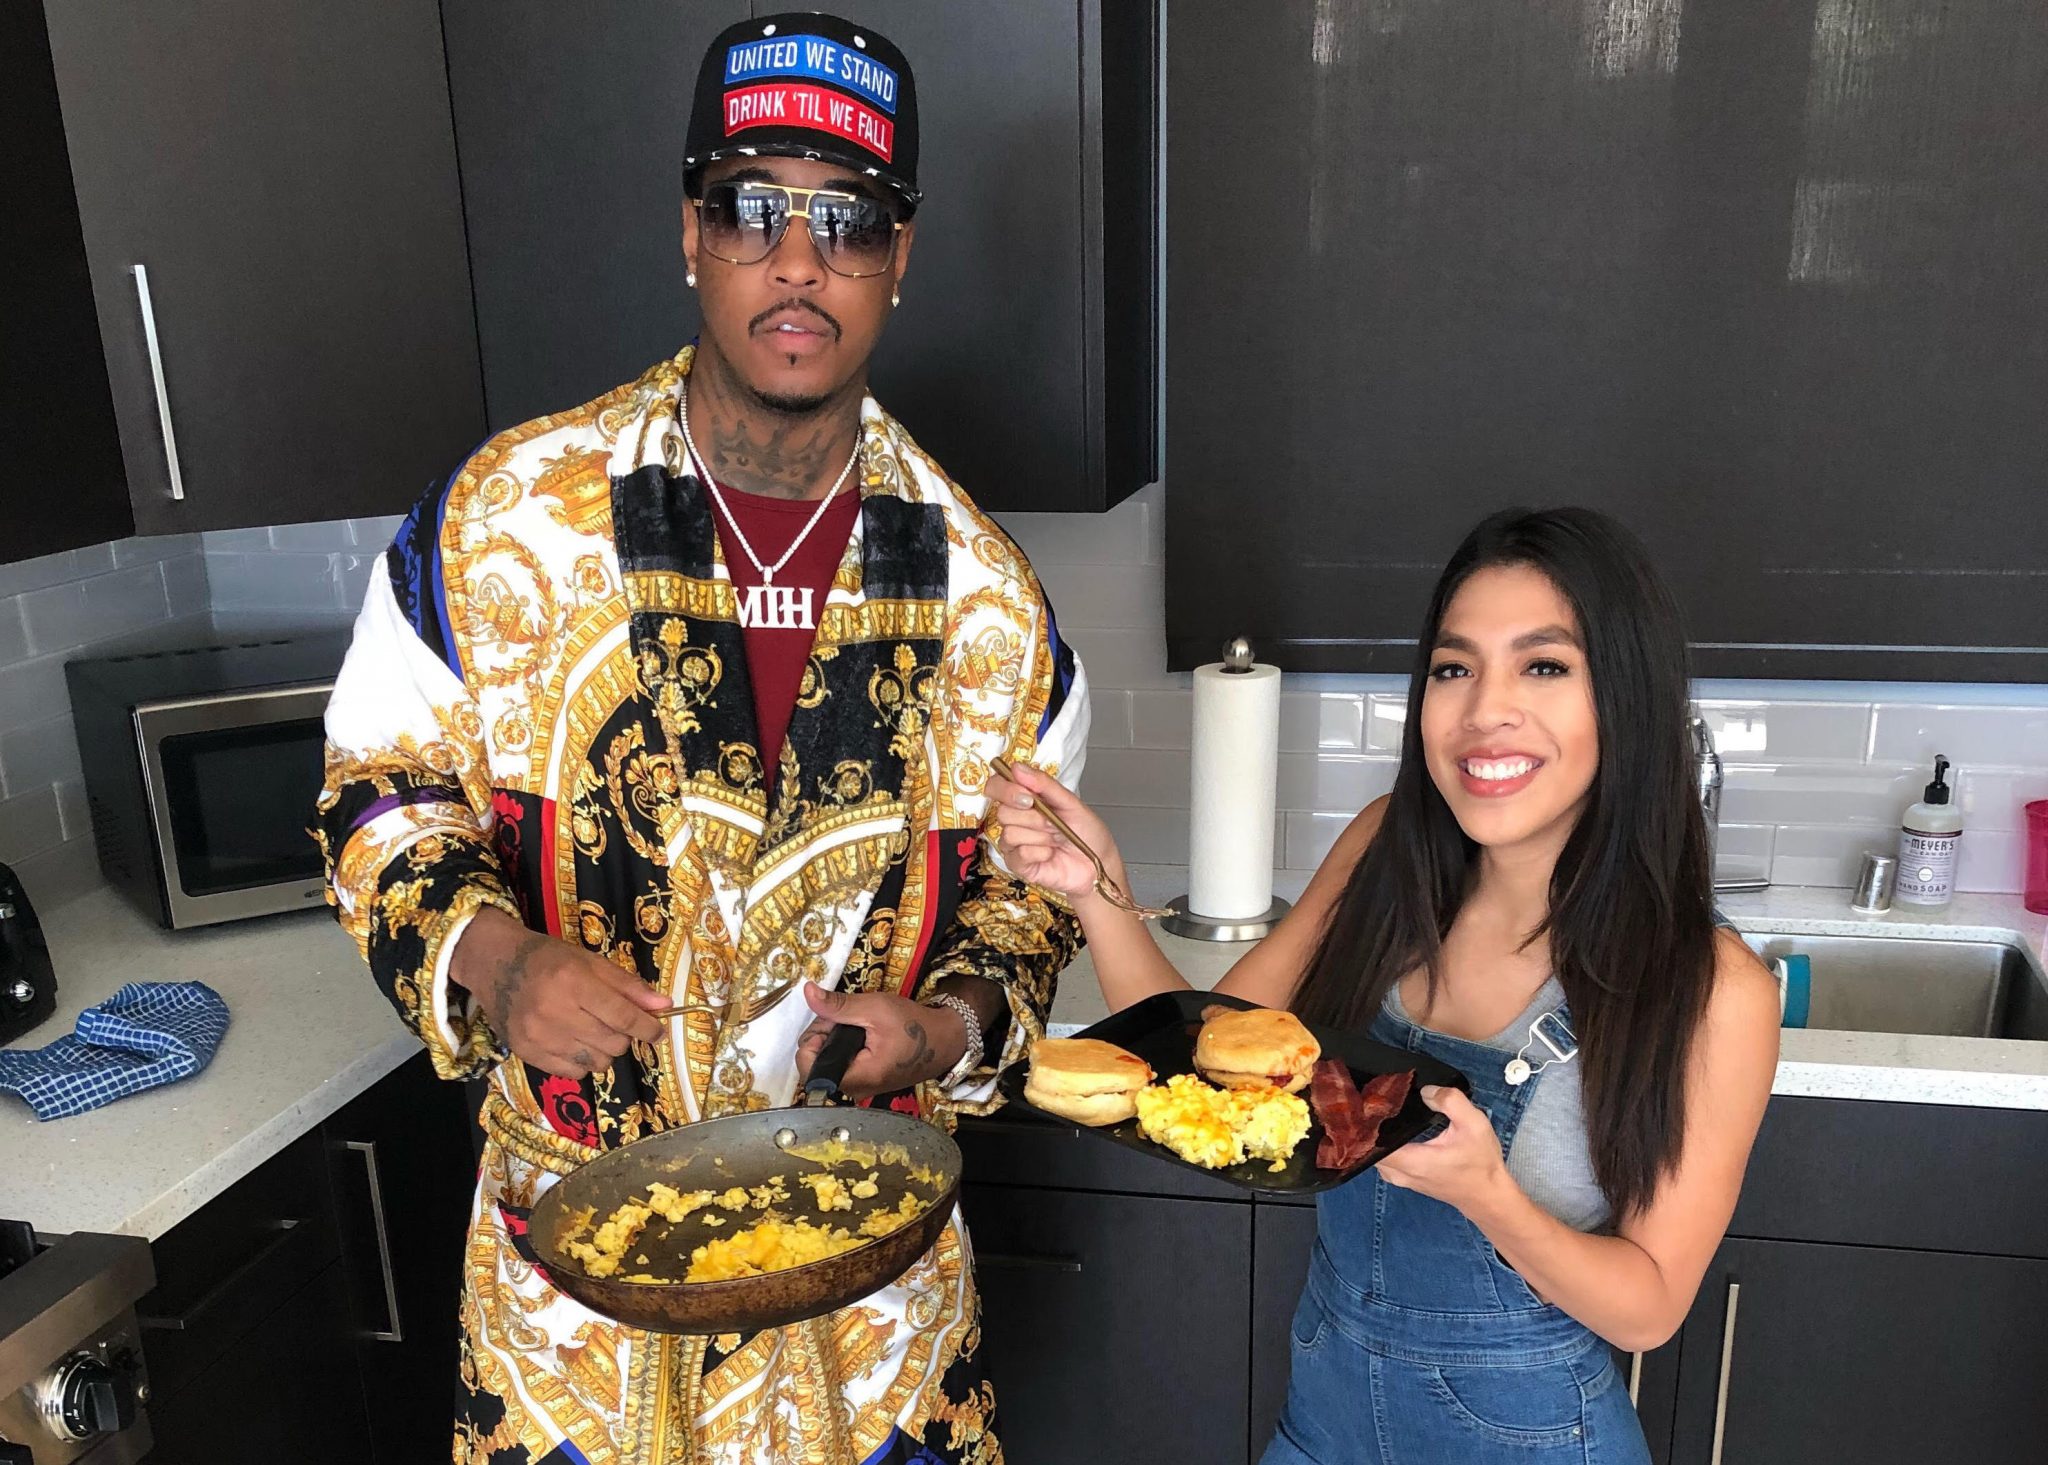 Cooking Breakfast with Jeremih